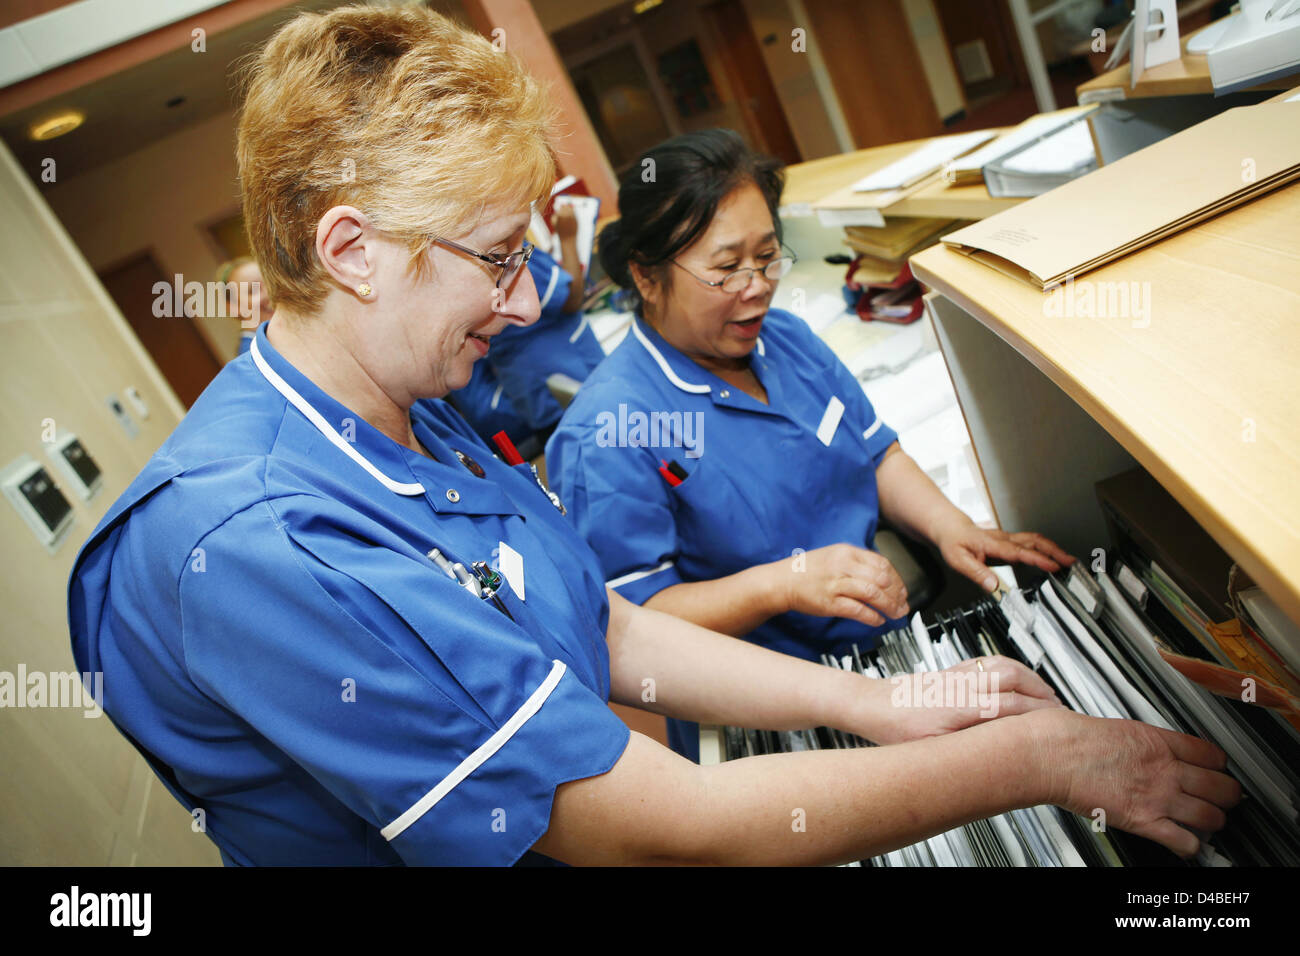 Two hospital nurses in dark blue uniforms filing patient notes in London hospital Stock Photo